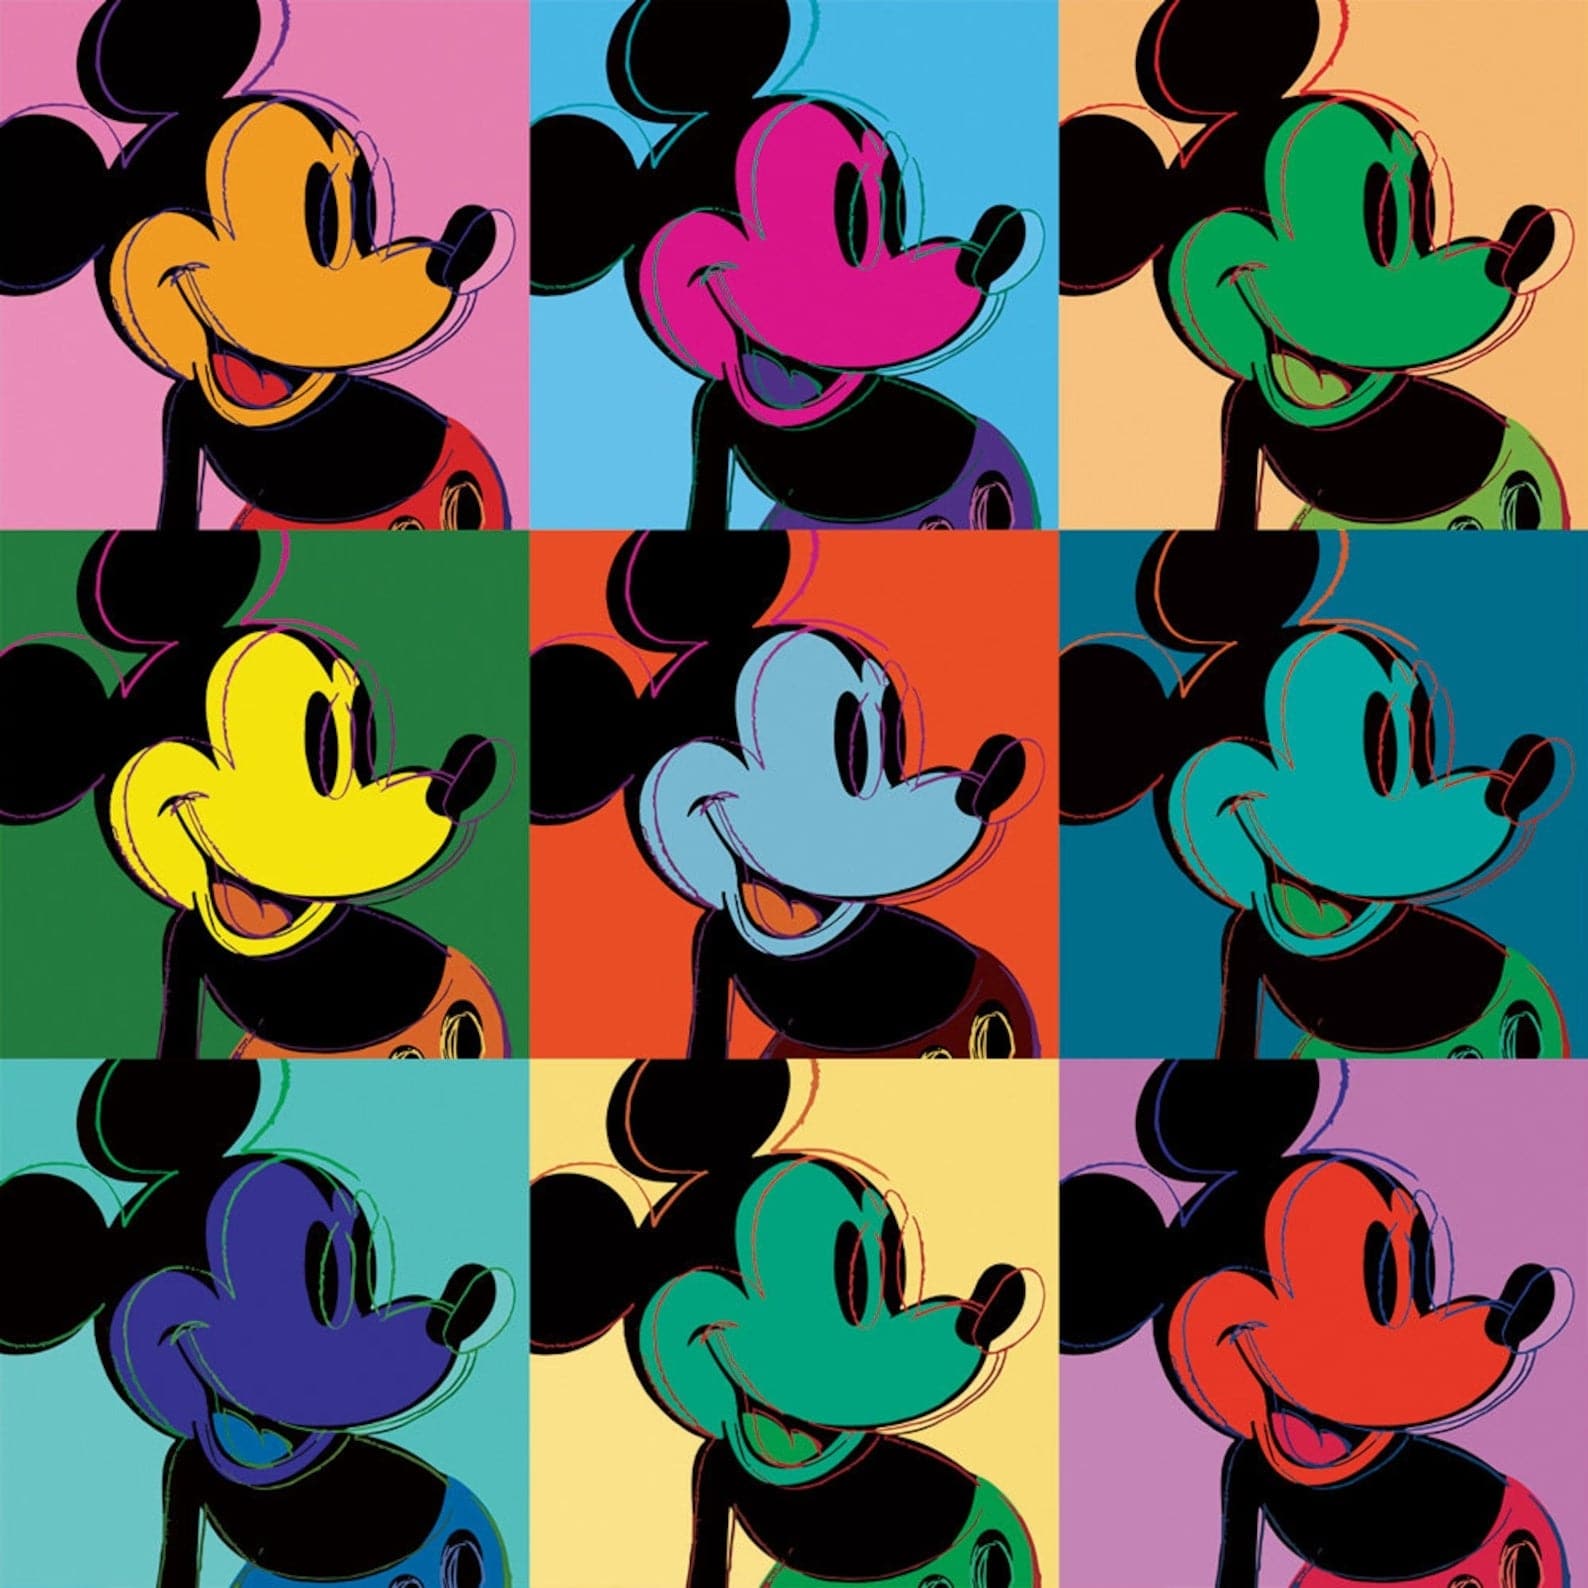 Framed 1 Panel - Mickey Mouse by Andy Warhol